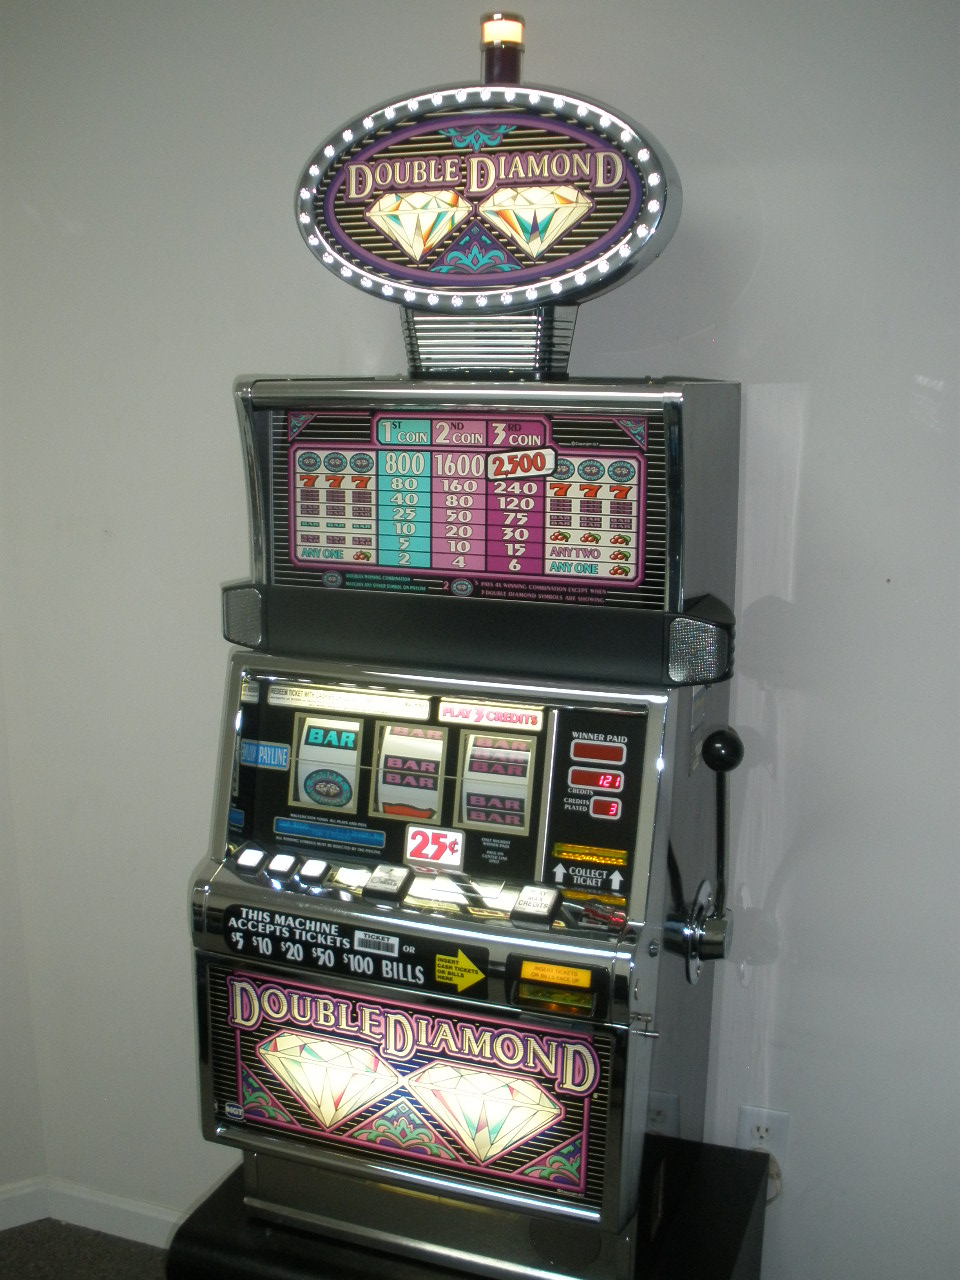 http://www.gamblersoasisusa.com/Shared/Images/Product/IGT-DOUBLE-DIAMOND-FLAT-TOP-S2000-SLOT-MACHINE-with-LIGHTED-TOPPER/P8100290.jpg